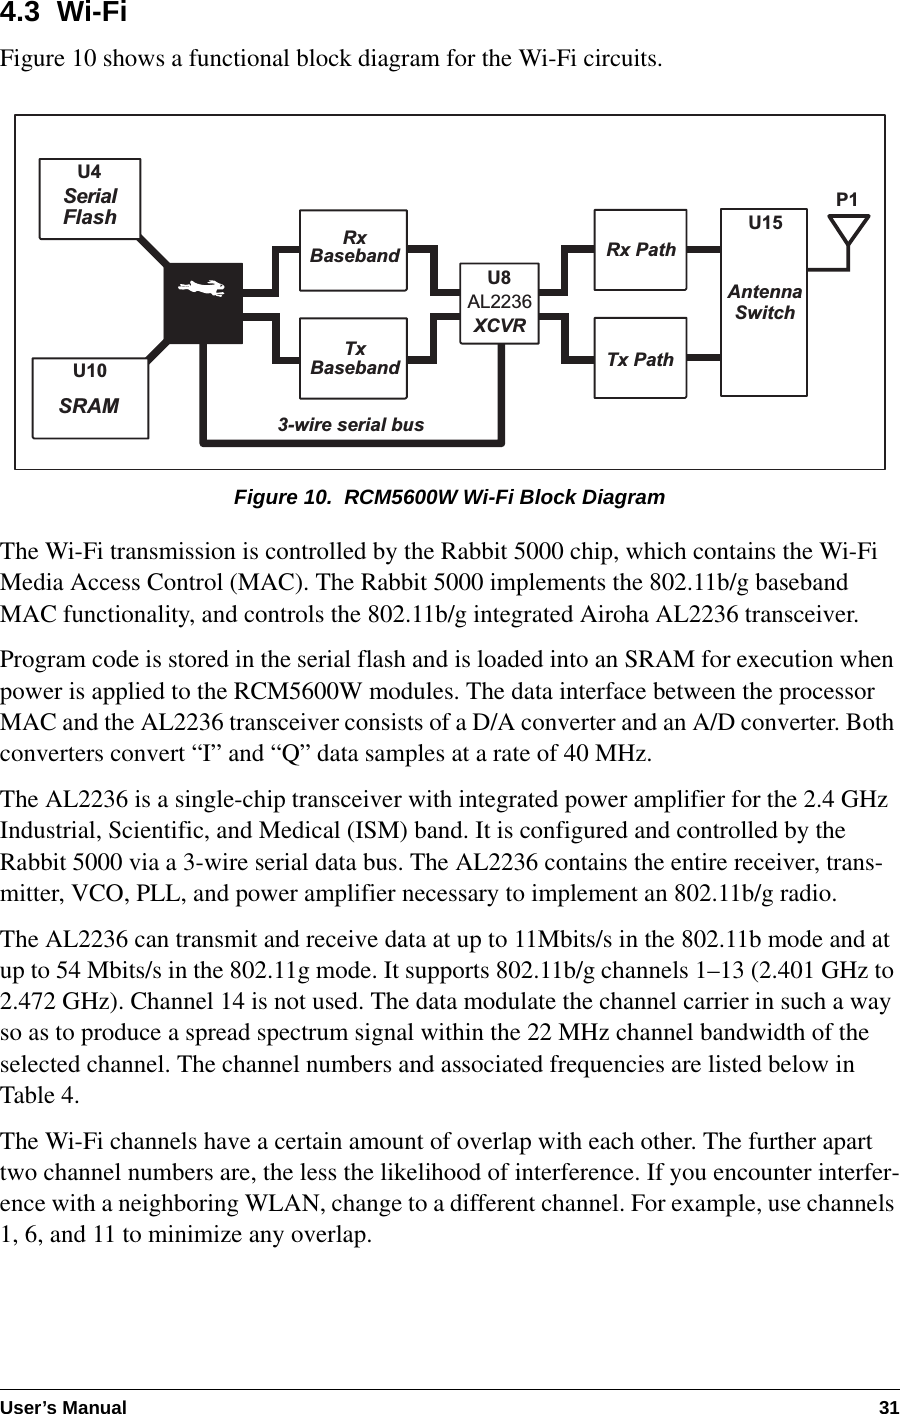 User’s Manual 314.3  Wi-FiFigure 10 shows a functional block diagram for the Wi-Fi circuits.Figure 10.  RCM5600W Wi-Fi Block DiagramThe Wi-Fi transmission is controlled by the Rabbit 5000 chip, which contains the Wi-Fi Media Access Control (MAC). The Rabbit 5000 implements the 802.11b/g baseband MAC functionality, and controls the 802.11b/g integrated Airoha AL2236 transceiver.Program code is stored in the serial flash and is loaded into an SRAM for execution when power is applied to the RCM5600W modules. The data interface between the processor MAC and the AL2236 transceiver consists of a D/A converter and an A/D converter. Both converters convert “I” and “Q” data samples at a rate of 40 MHz.The AL2236 is a single-chip transceiver with integrated power amplifier for the 2.4 GHz Industrial, Scientific, and Medical (ISM) band. It is configured and controlled by the Rabbit 5000 via a 3-wire serial data bus. The AL2236 contains the entire receiver, trans-mitter, VCO, PLL, and power amplifier necessary to implement an 802.11b/g radio. The AL2236 can transmit and receive data at up to 11Mbits/s in the 802.11b mode and at up to 54 Mbits/s in the 802.11g mode. It supports 802.11b/g channels 1–13 (2.401 GHz to 2.472 GHz). Channel 14 is not used. The data modulate the channel carrier in such a way so as to produce a spread spectrum signal within the 22 MHz channel bandwidth of the selected channel. The channel numbers and associated frequencies are listed below in Table 4.The Wi-Fi channels have a certain amount of overlap with each other. The further apart two channel numbers are, the less the likelihood of interference. If you encounter interfer-ence with a neighboring WLAN, change to a different channel. For example, use channels 1, 6, and 11 to minimize any overlap.U15AntennaSwitchP1XCVRU8AL2236Rx PathTx PathRxBasebandTxBaseband3-wire serial busU4SerialFlashU10SRAM